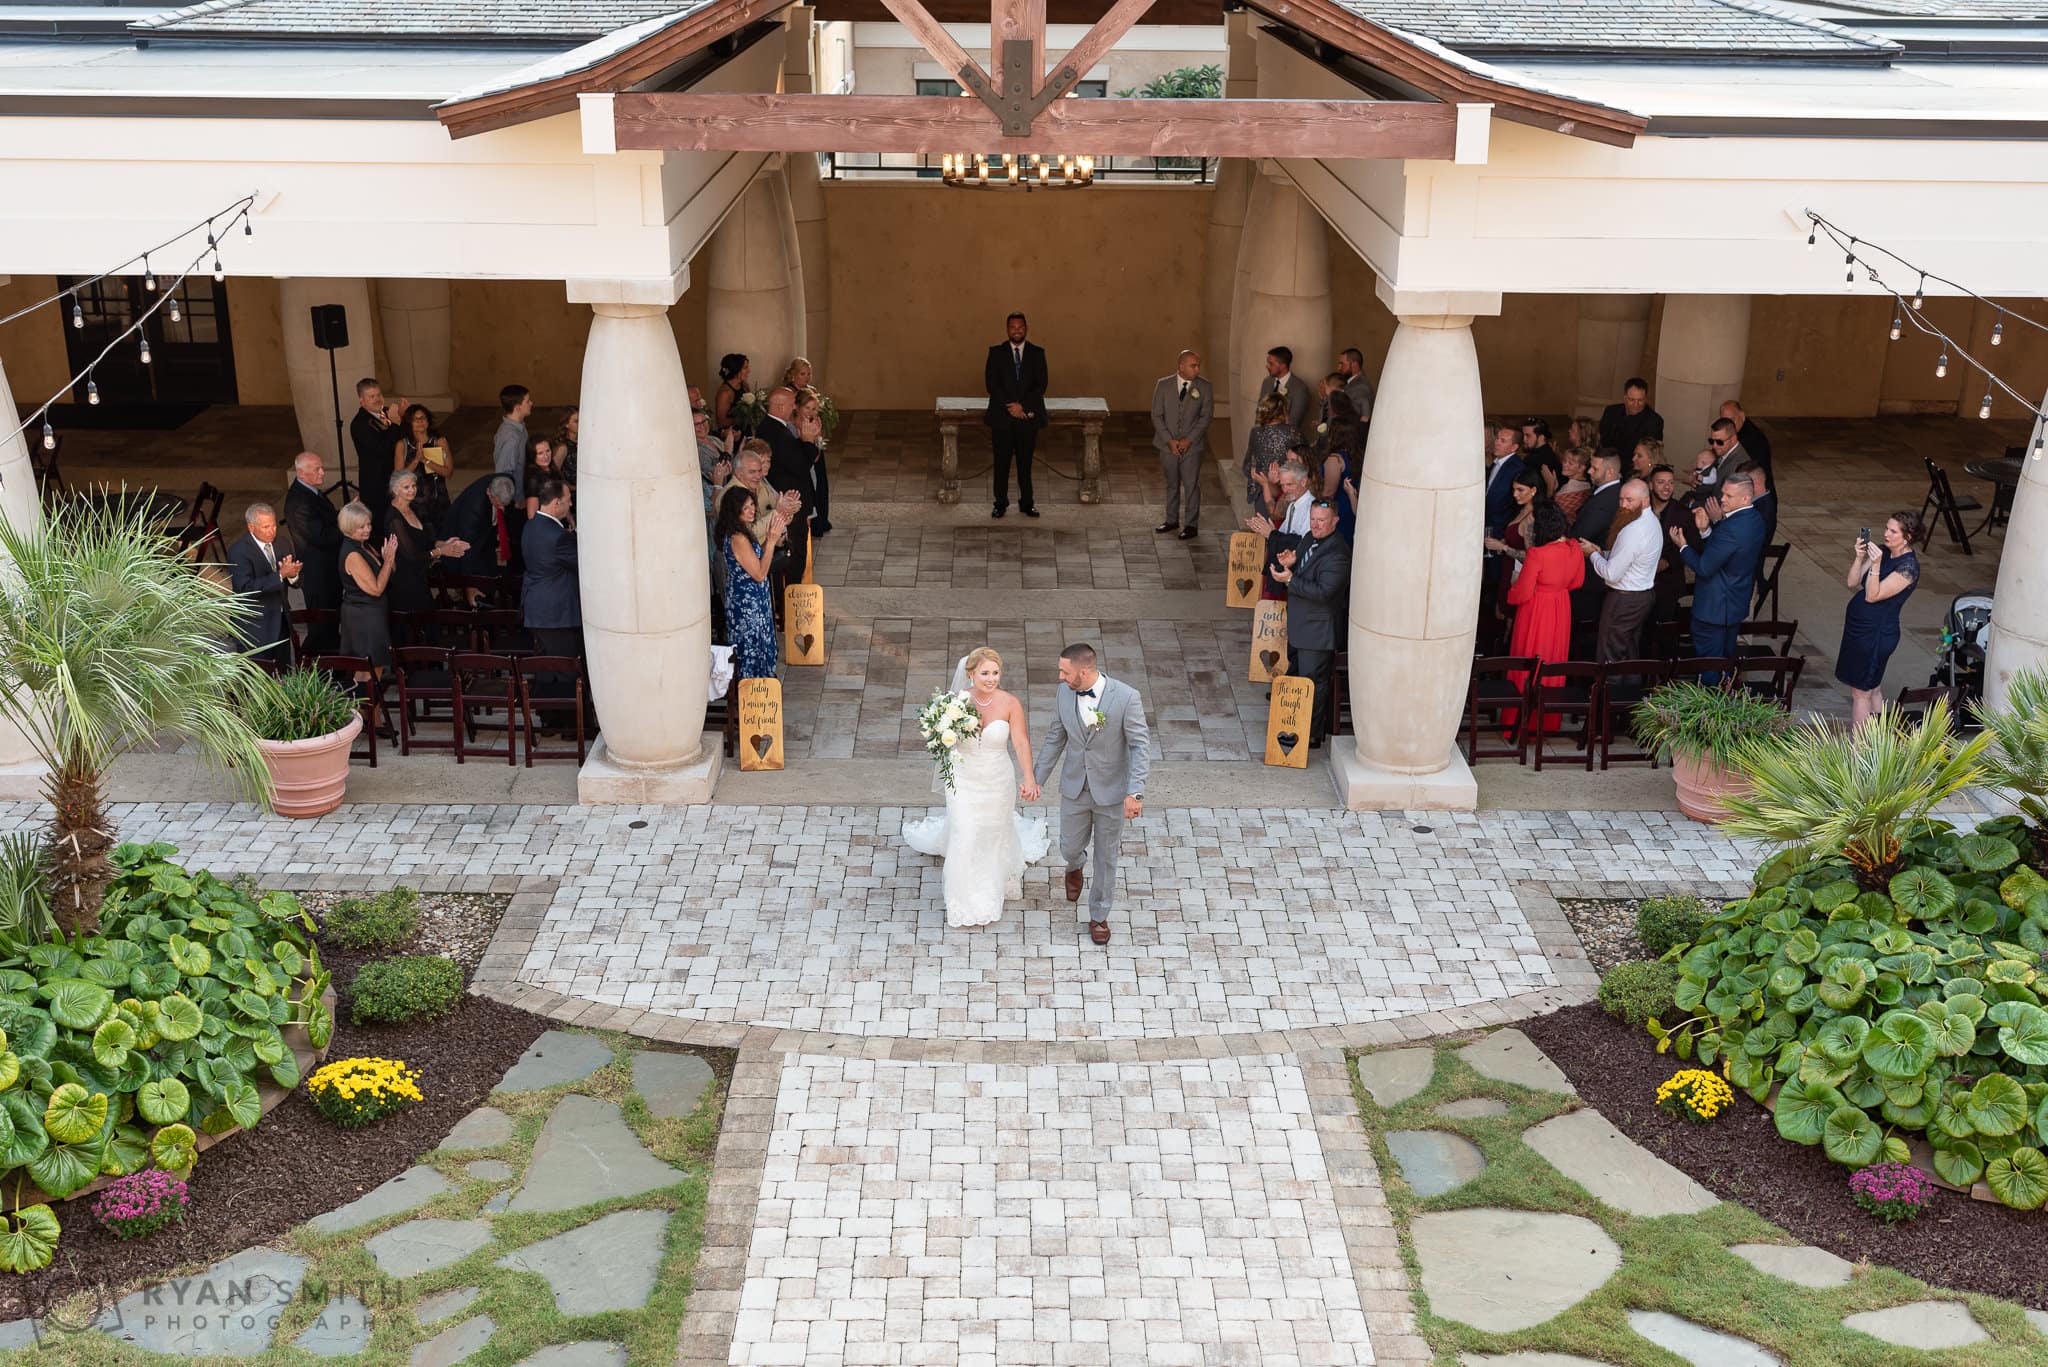 Balcony view of bride and groom after ceremony - 21 Main Events - North Myrtle Beach